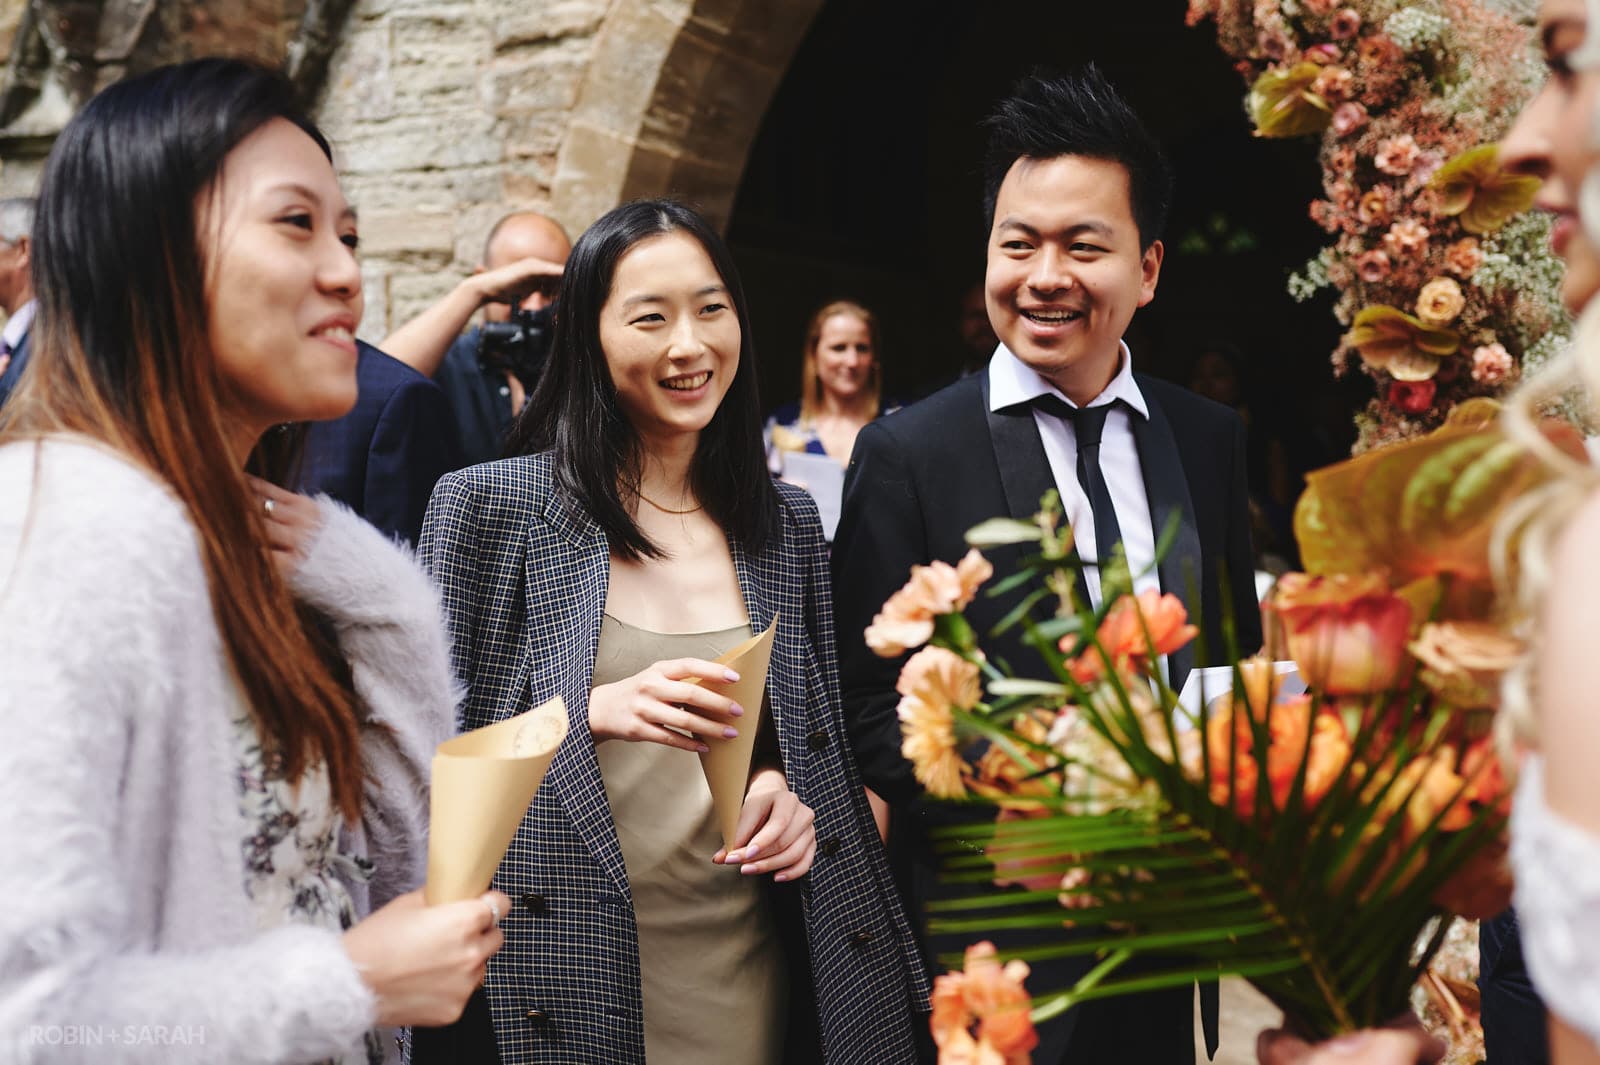 Wedding guests congratulate bride and groom outside church